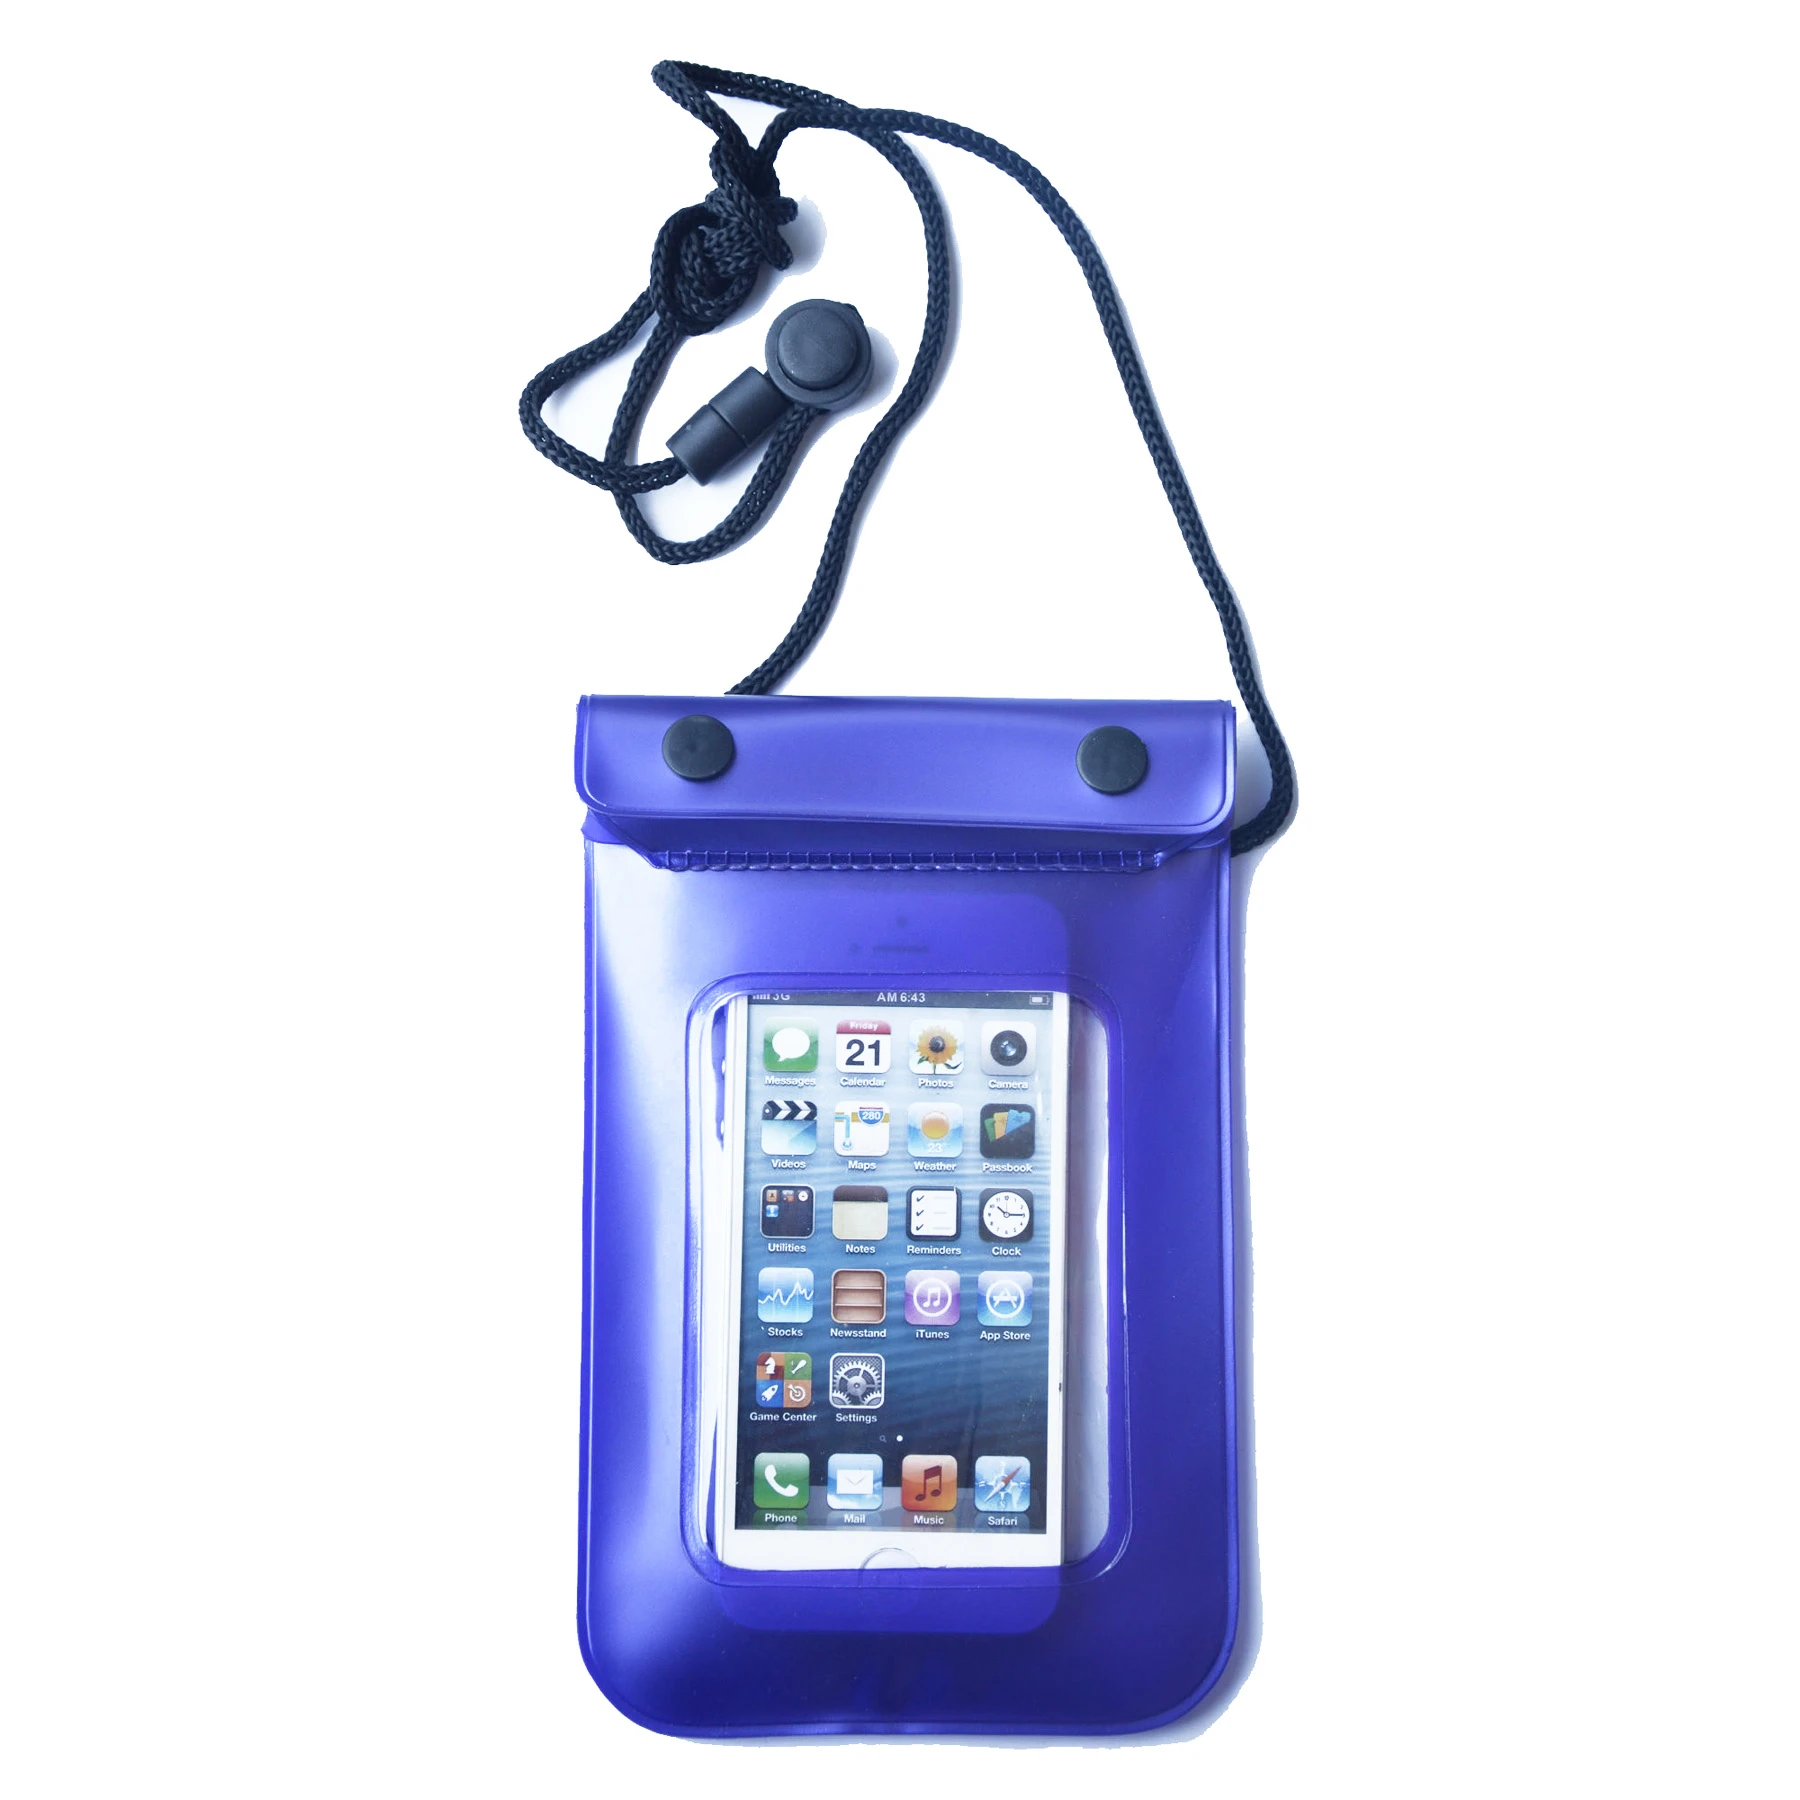 Promotion gift Phone Accessories Mobile Phone Waterproof Bag PVC Waterproof Phone Bags with Strap for Outdoor Camping